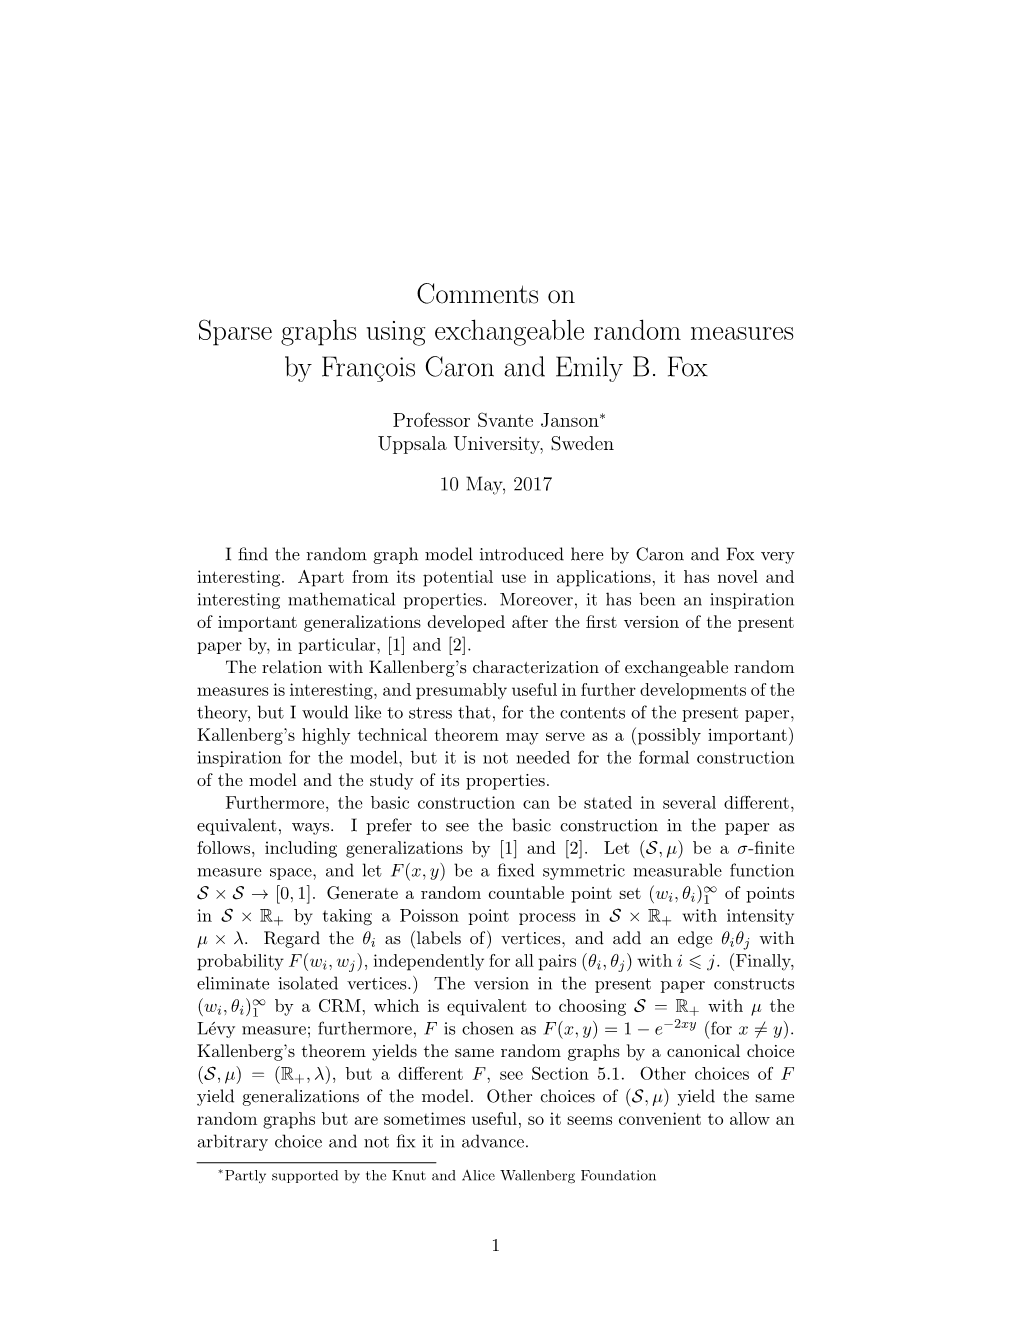 Comments on Sparse Graphs Using Exchangeable Random Measures by Fran¸Coiscaron and Emily B